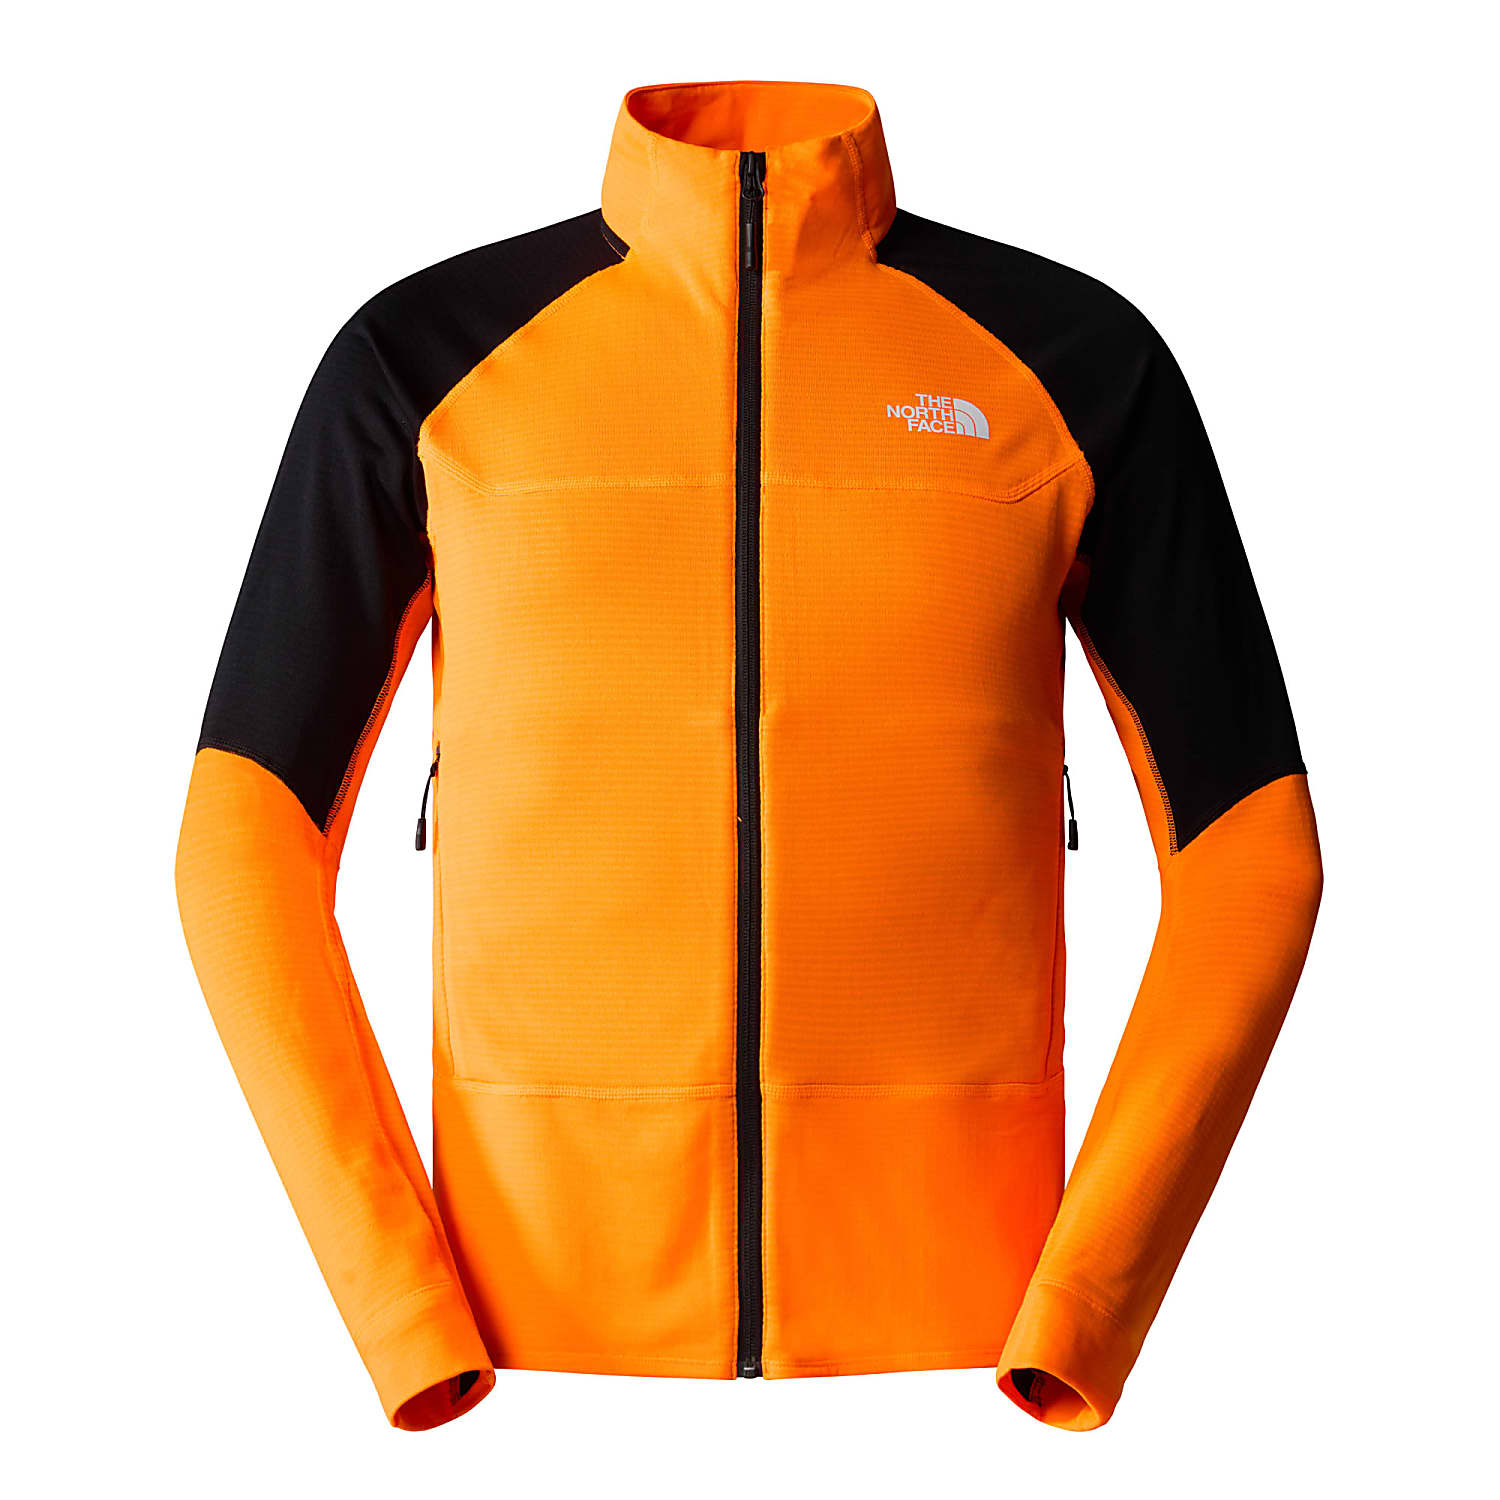 The North Face M BOLT - Shocking POLARTEC cheap Fast Black - and Orange JACKET, shipping TNF